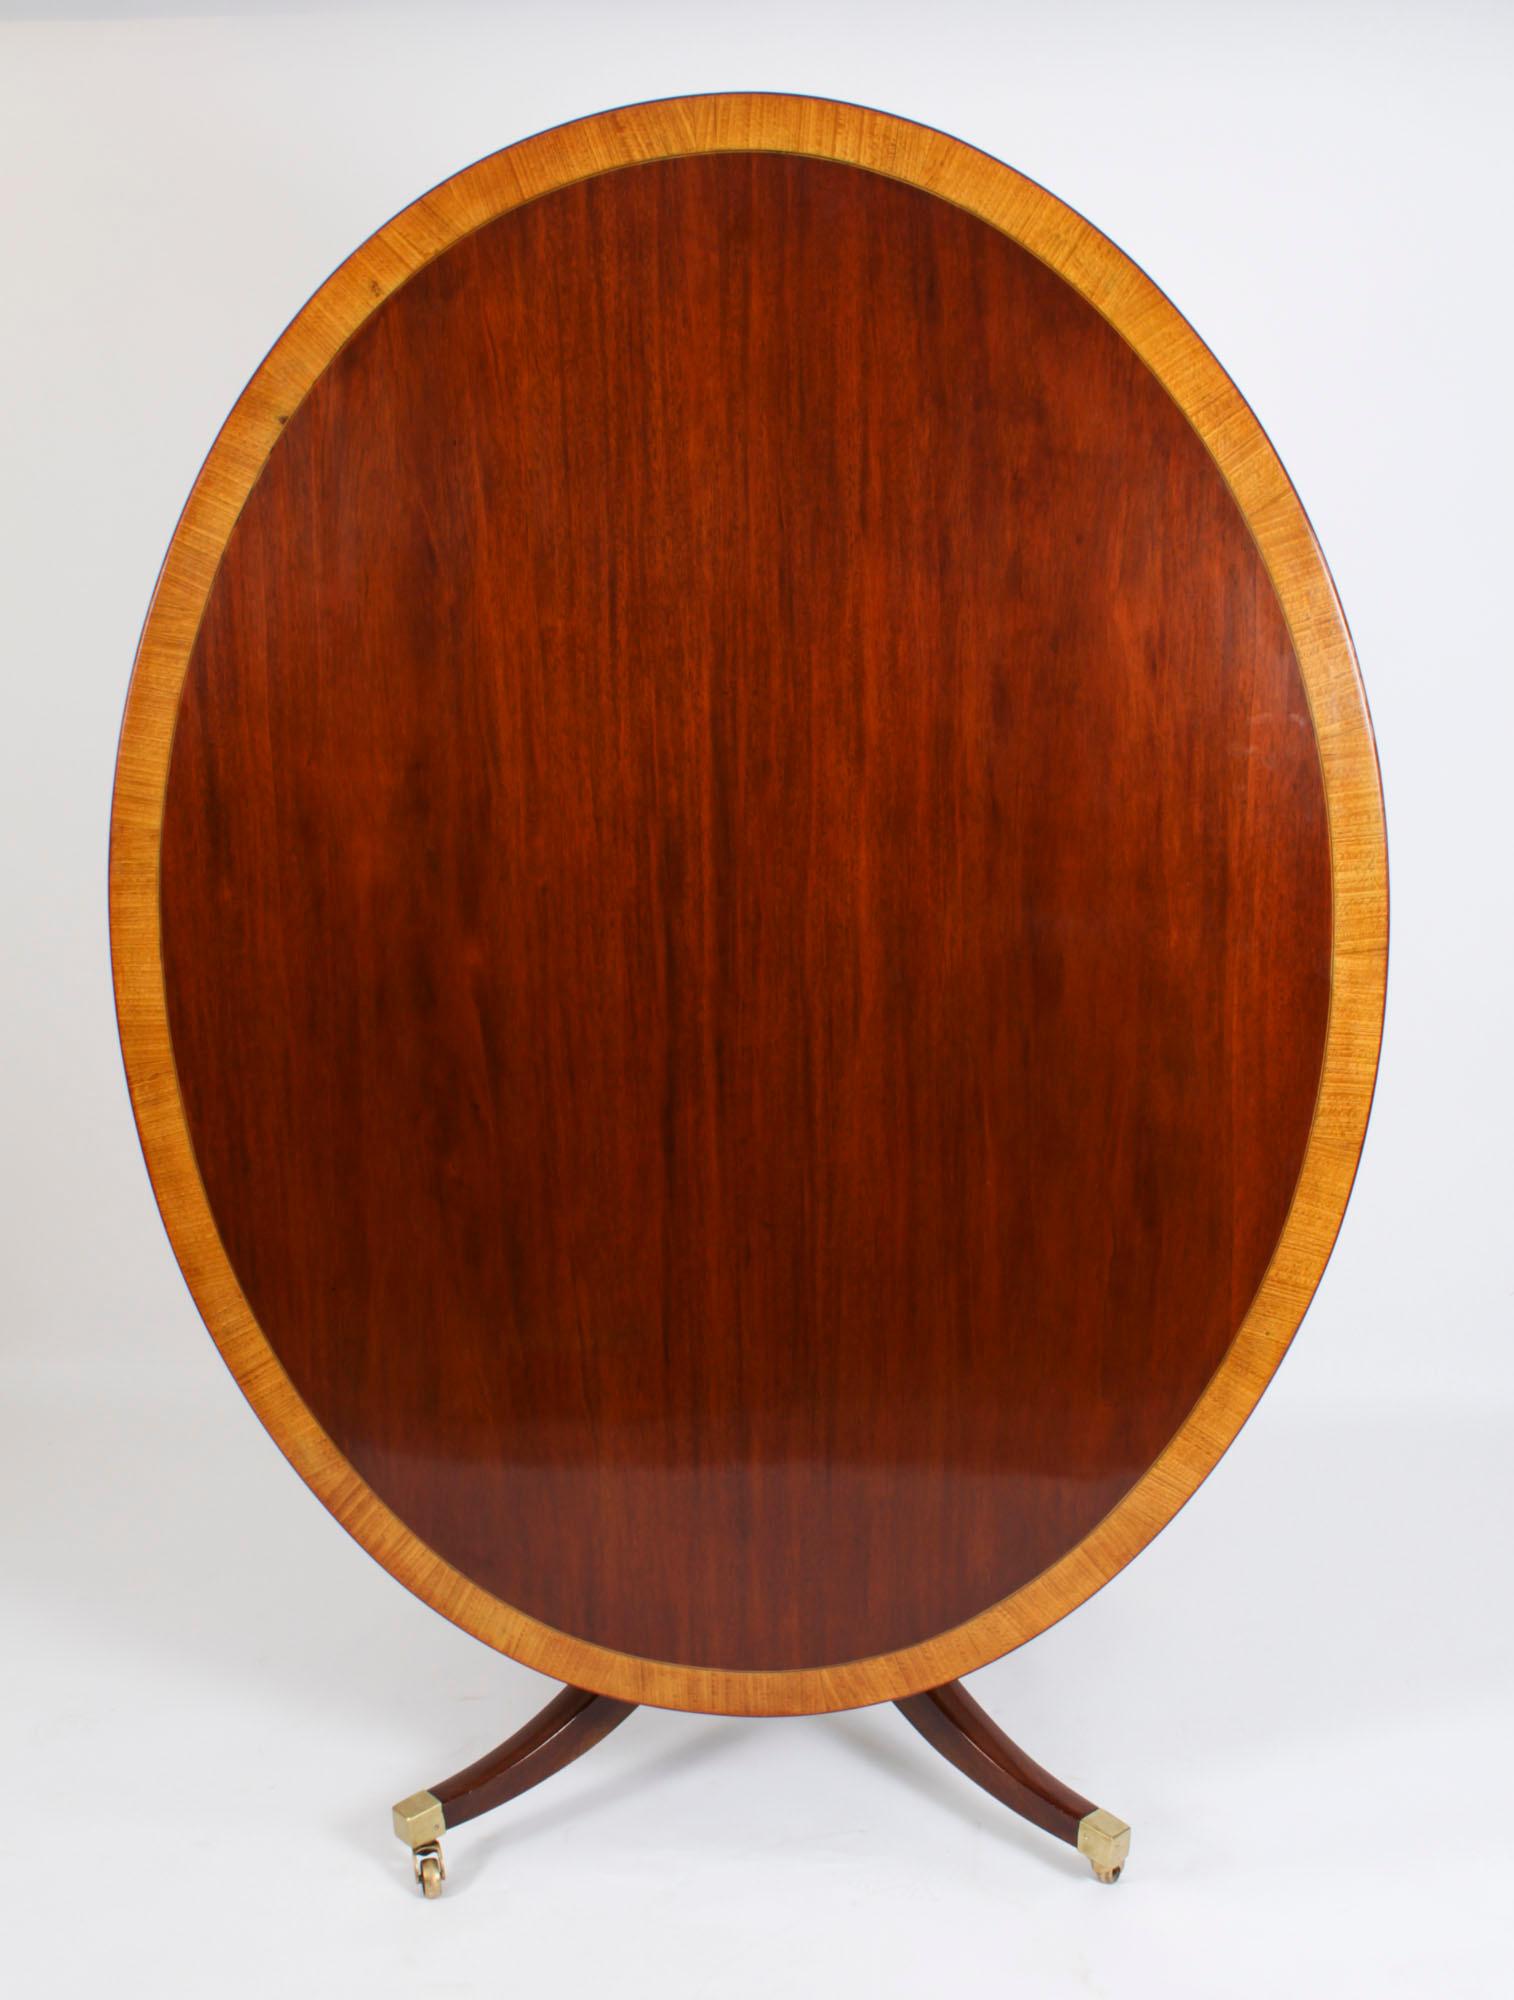 Antique Oval Mahogany Tilt Top Dining Table, Early 20th Century For Sale 7